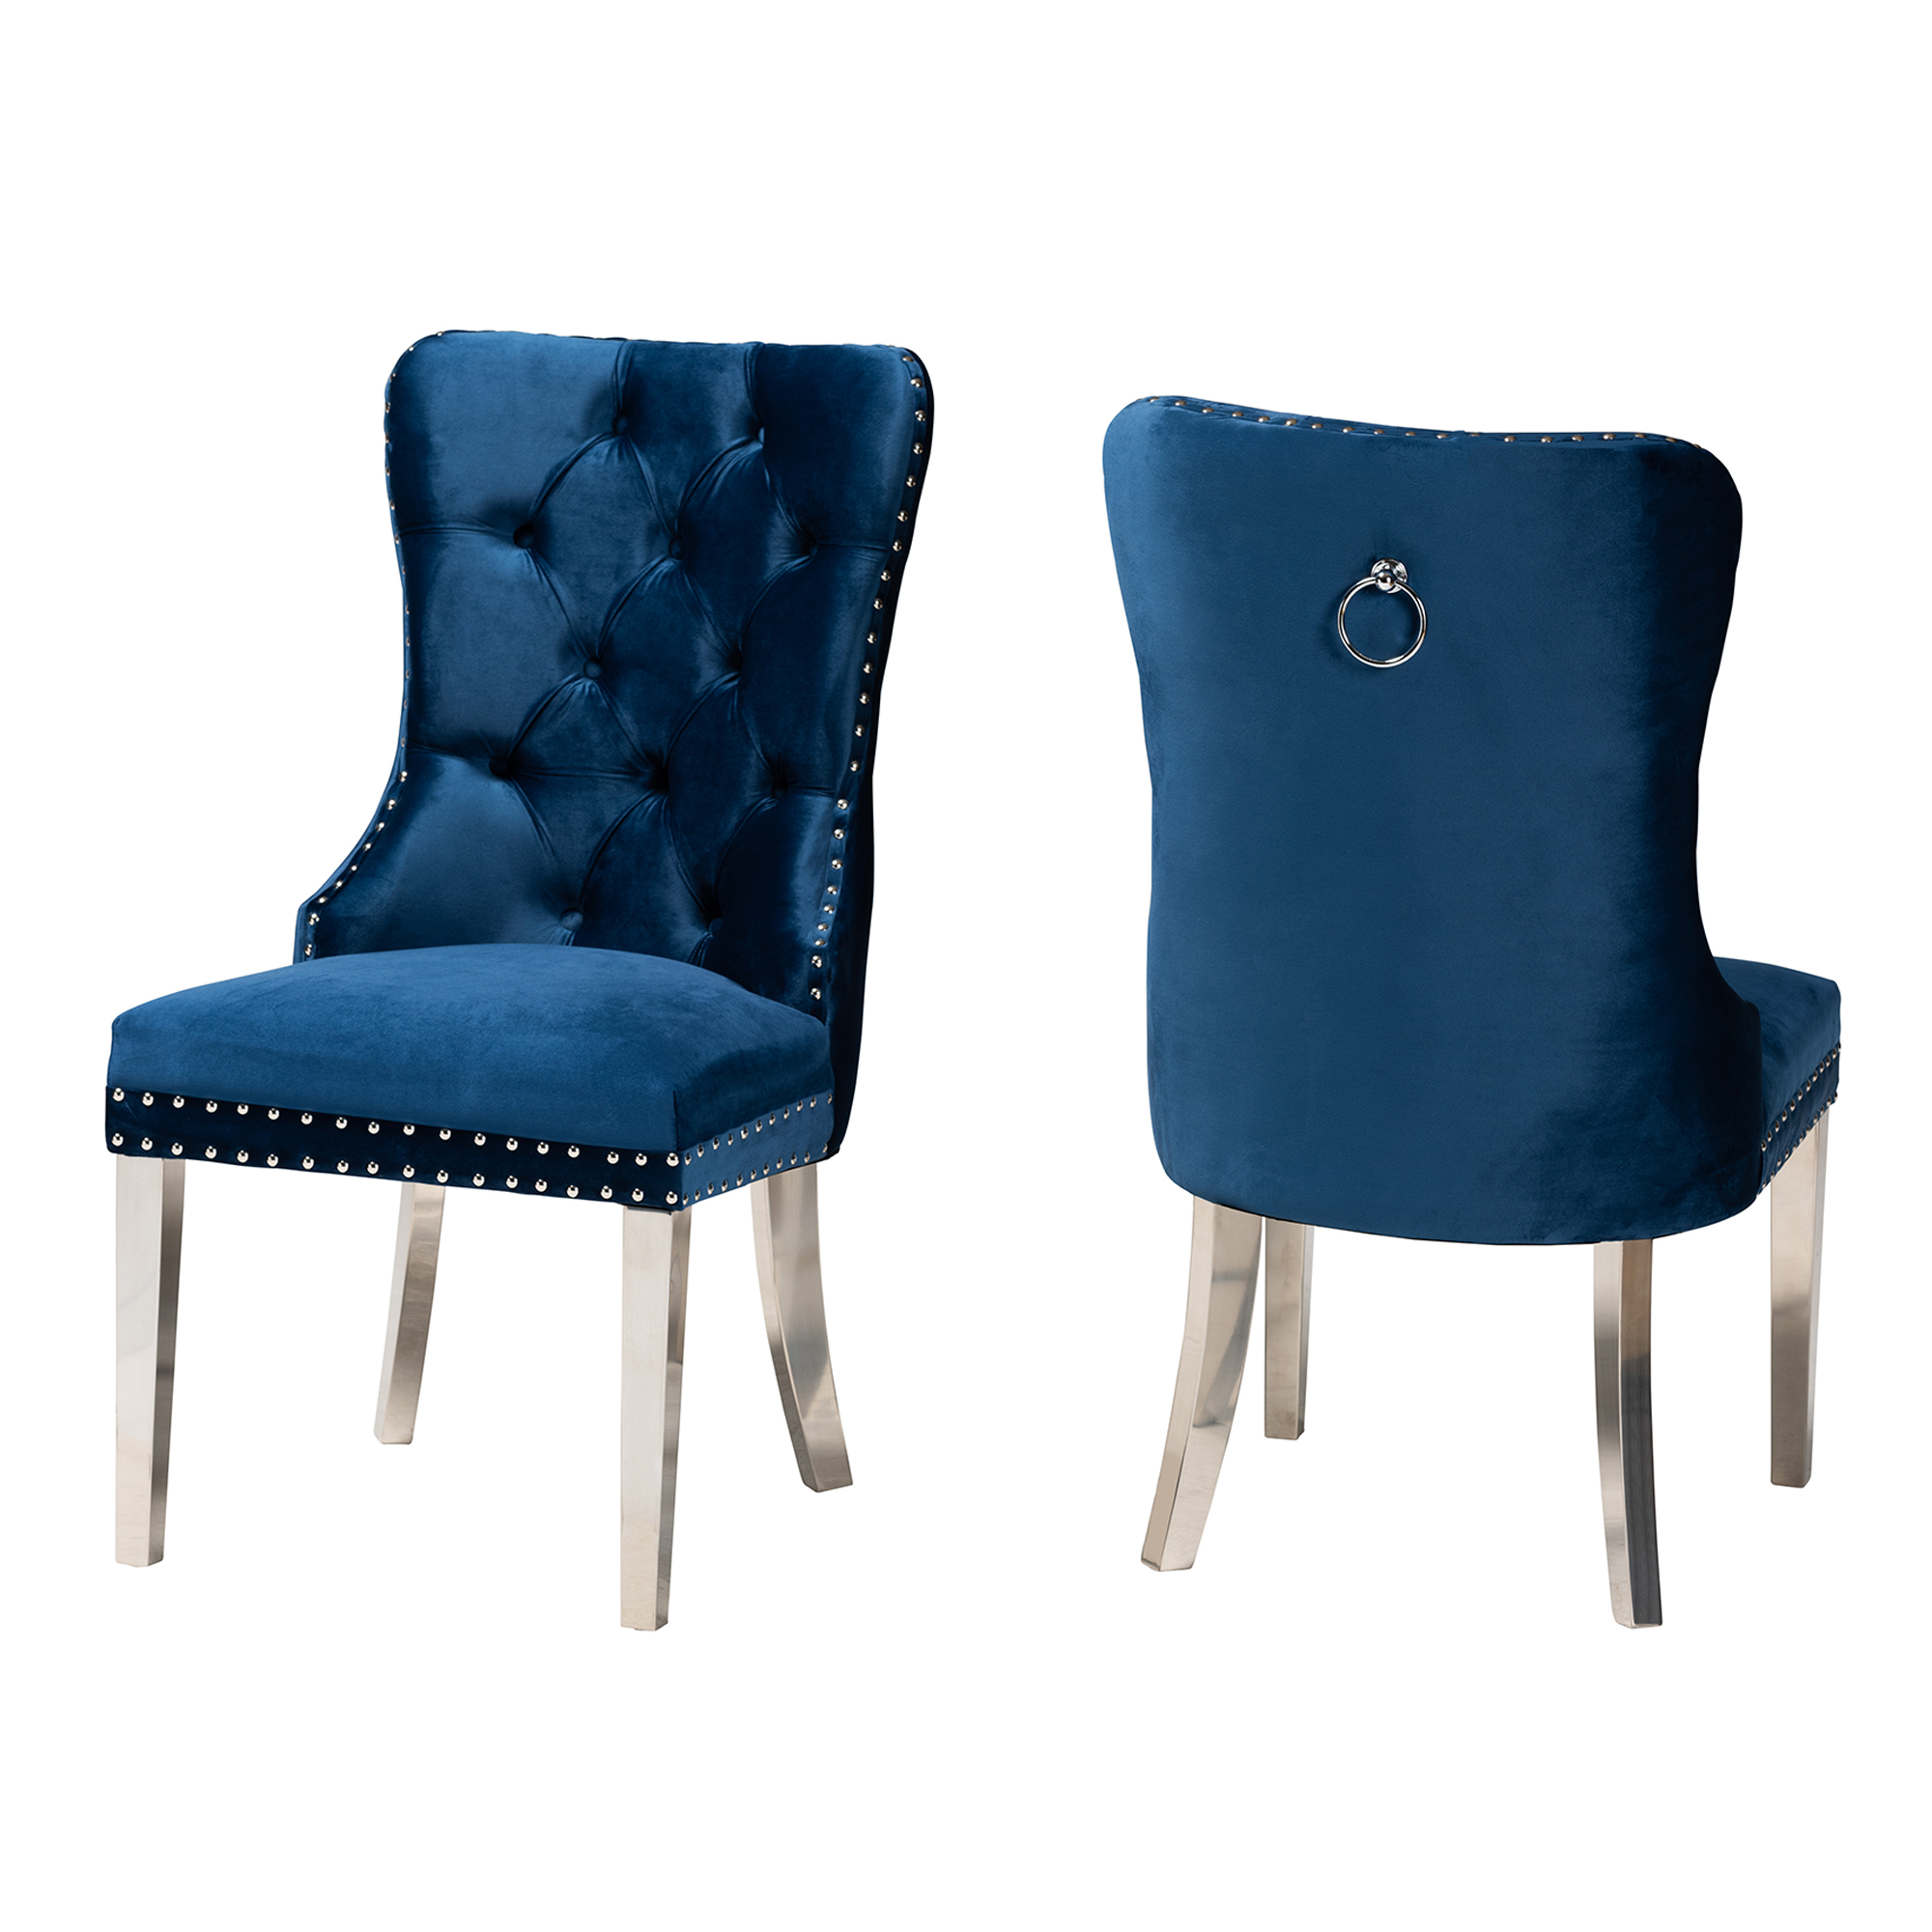 Baxton Studio Honora Contemporary Glam and Luxe Navy Blue Velvet Fabric and Silver Metal 2-Piece Dining Chair Set